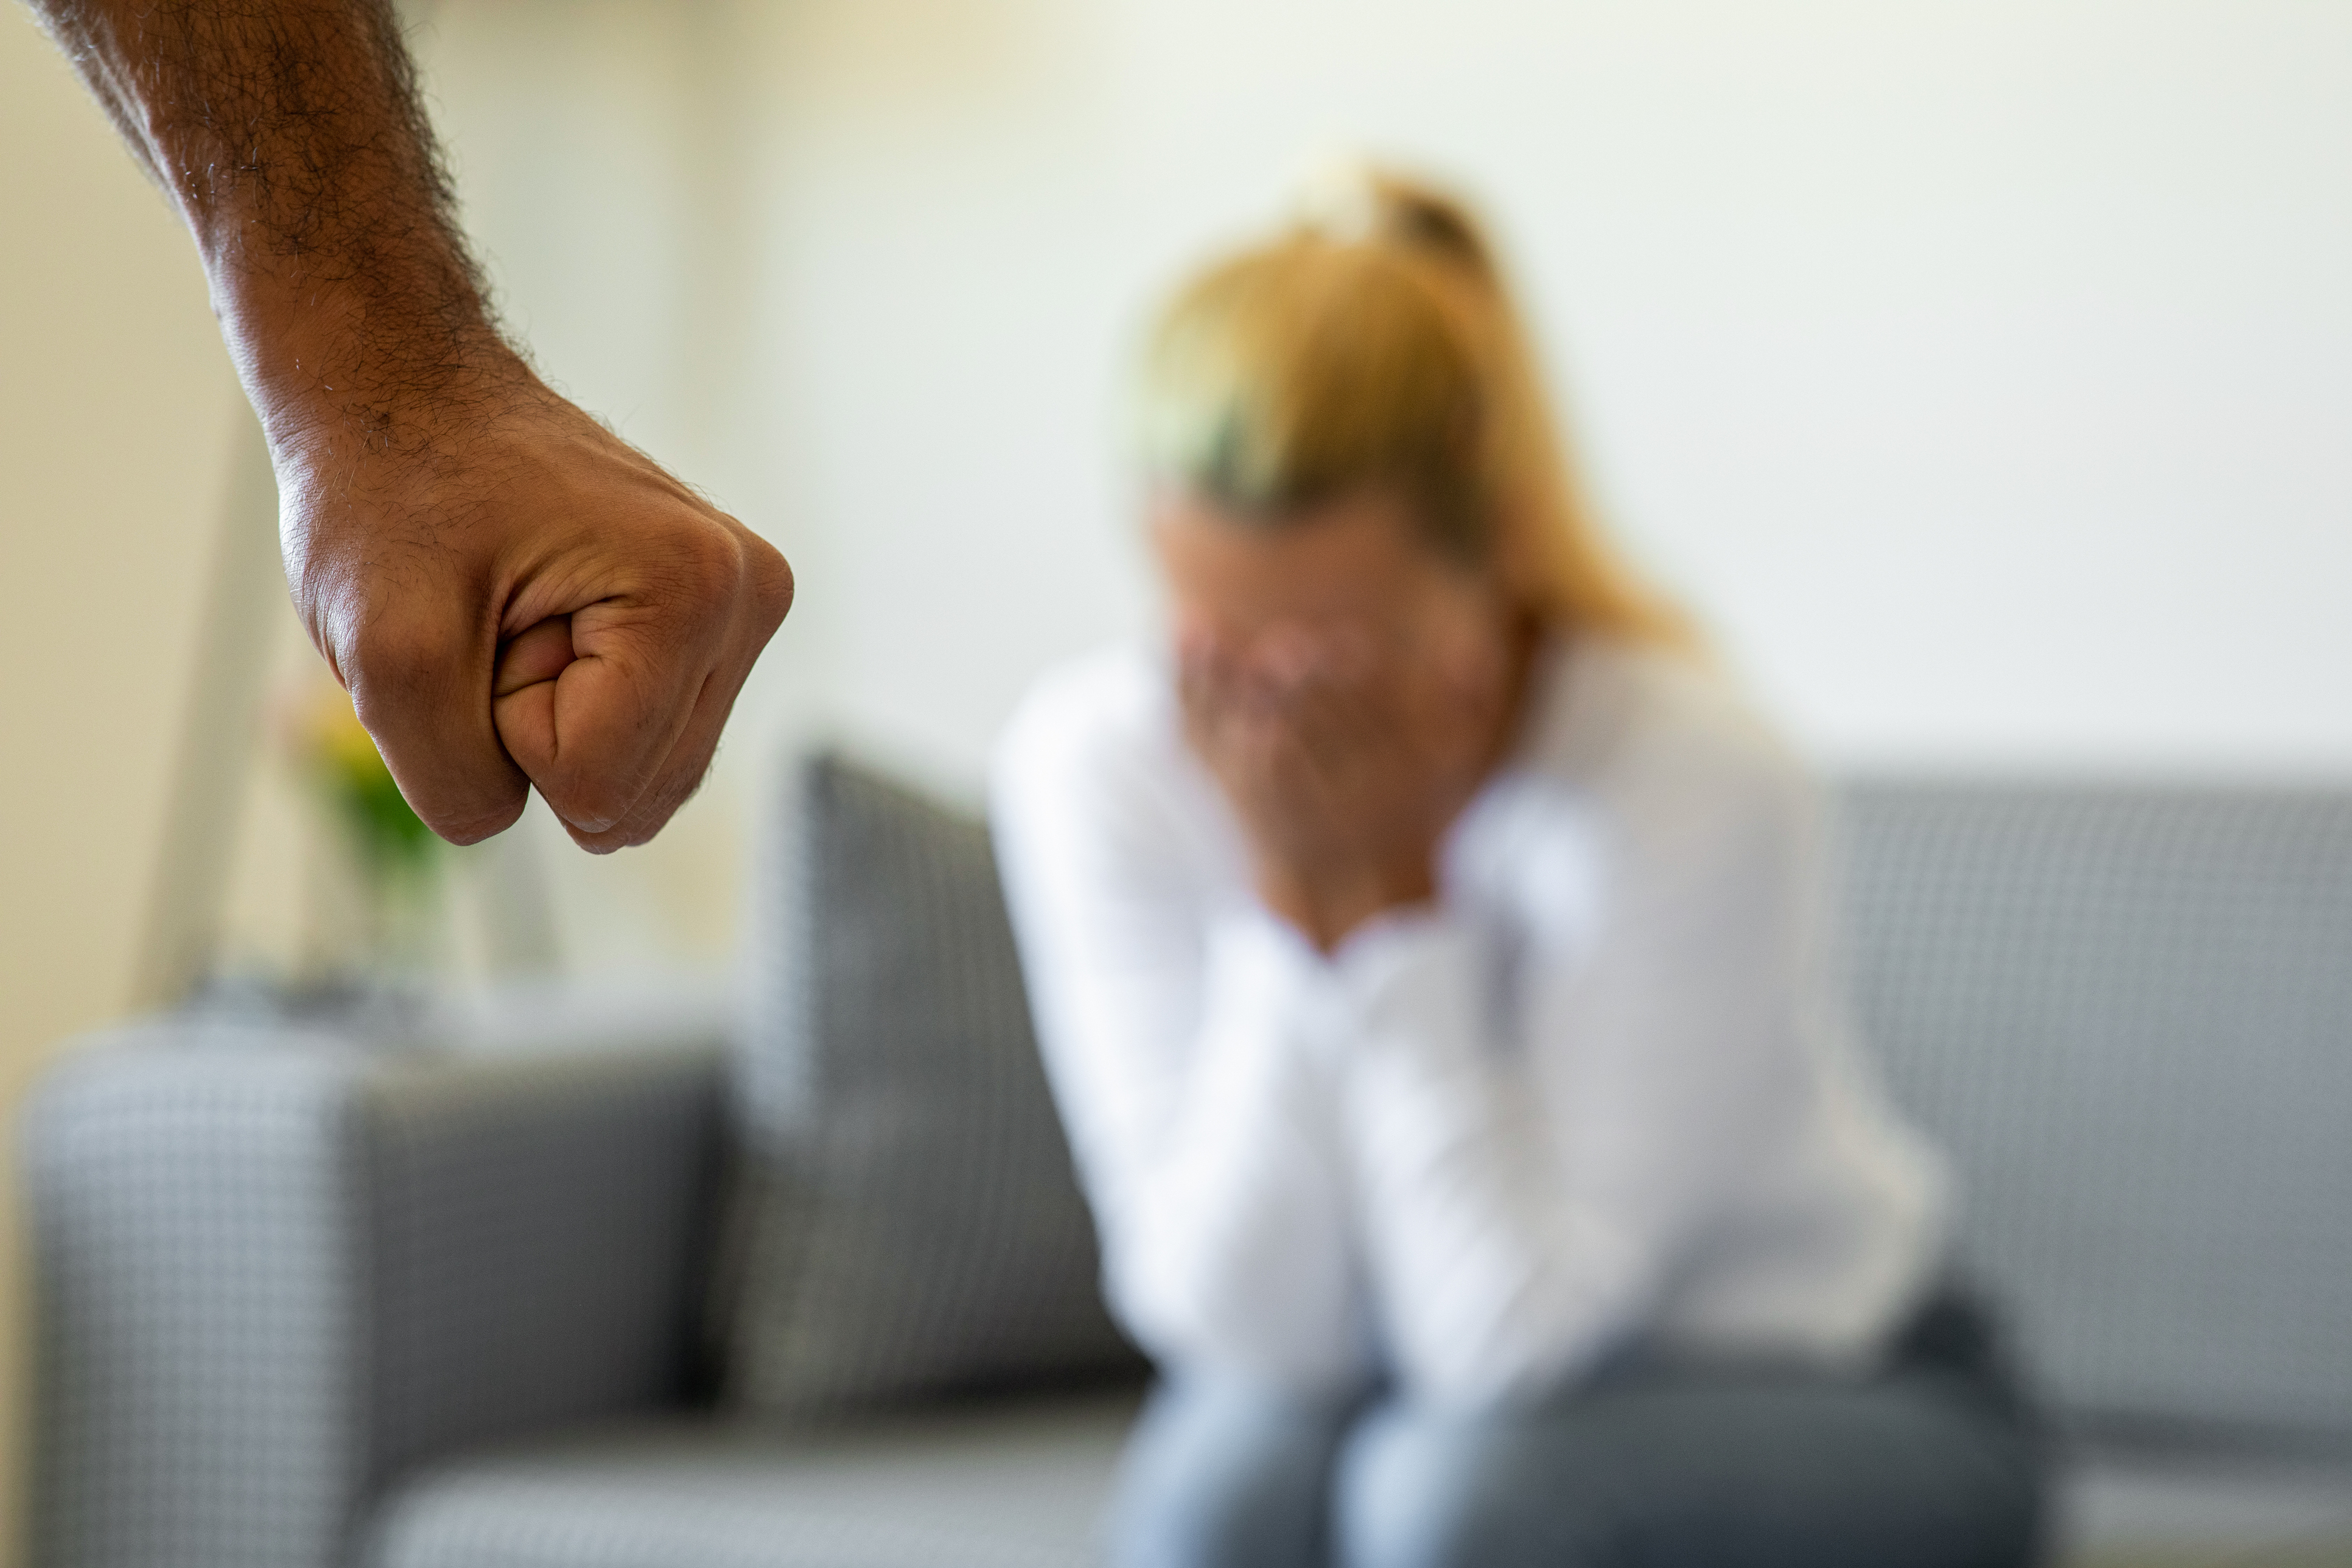 How To Go About Leaving A Physically Abusive Relationship Safely?